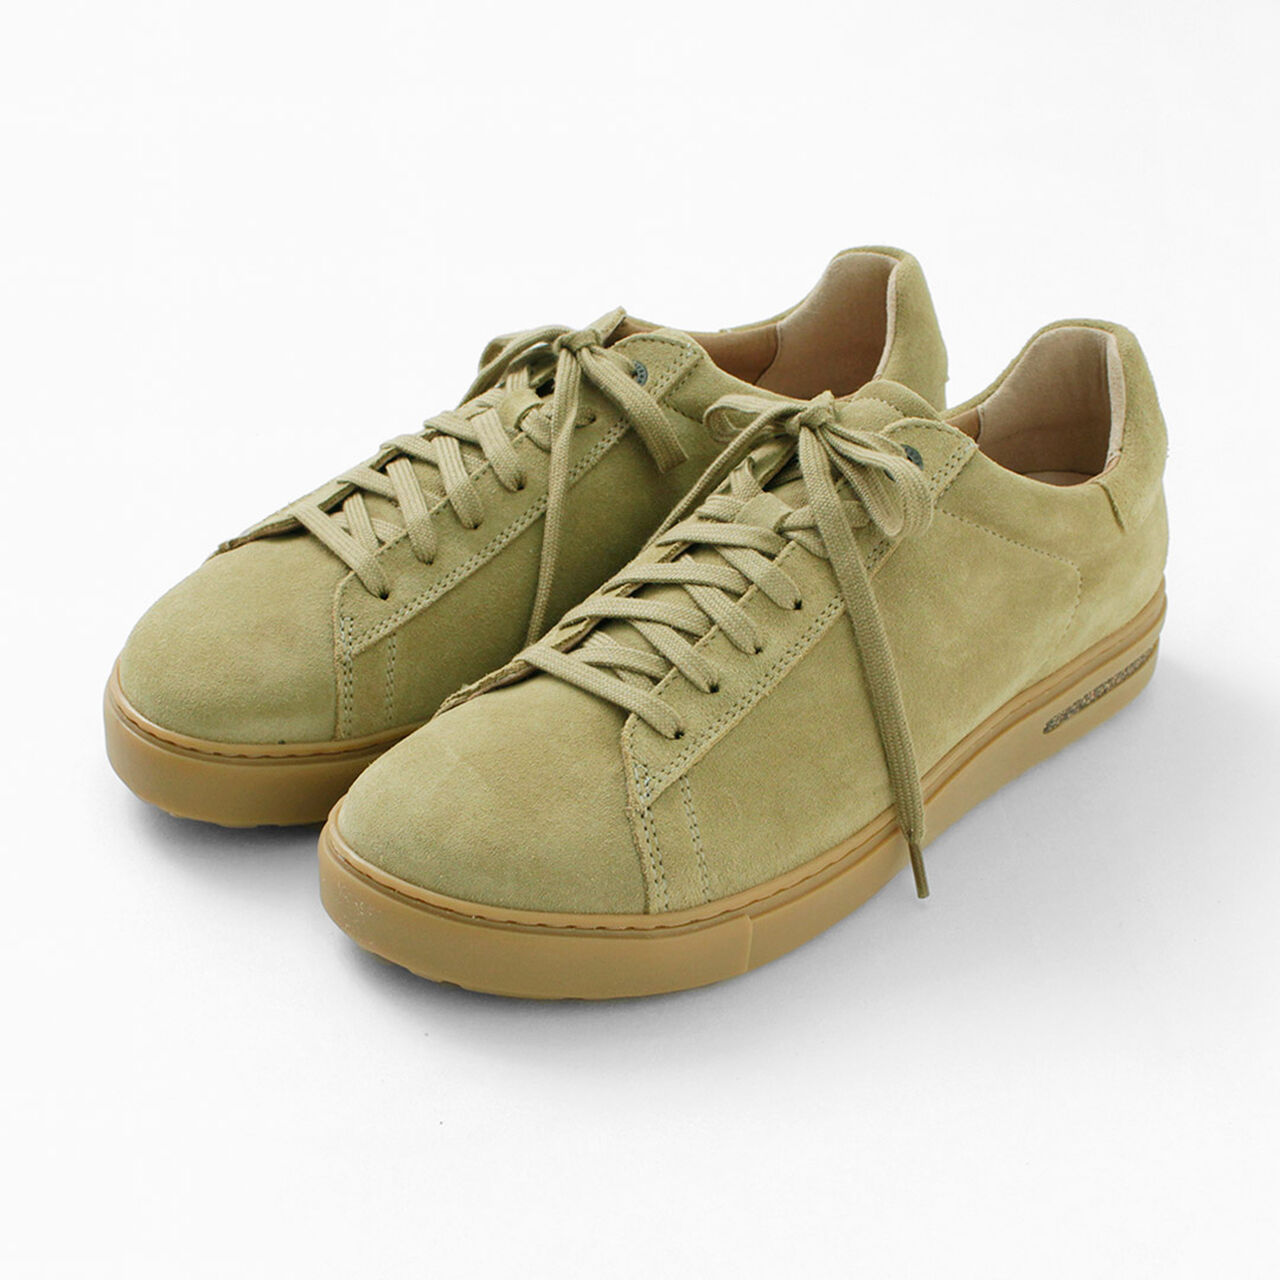 Bend Low / Suede Leather Velour Leather Leather Sneakers,FadedKhaki, large image number 0